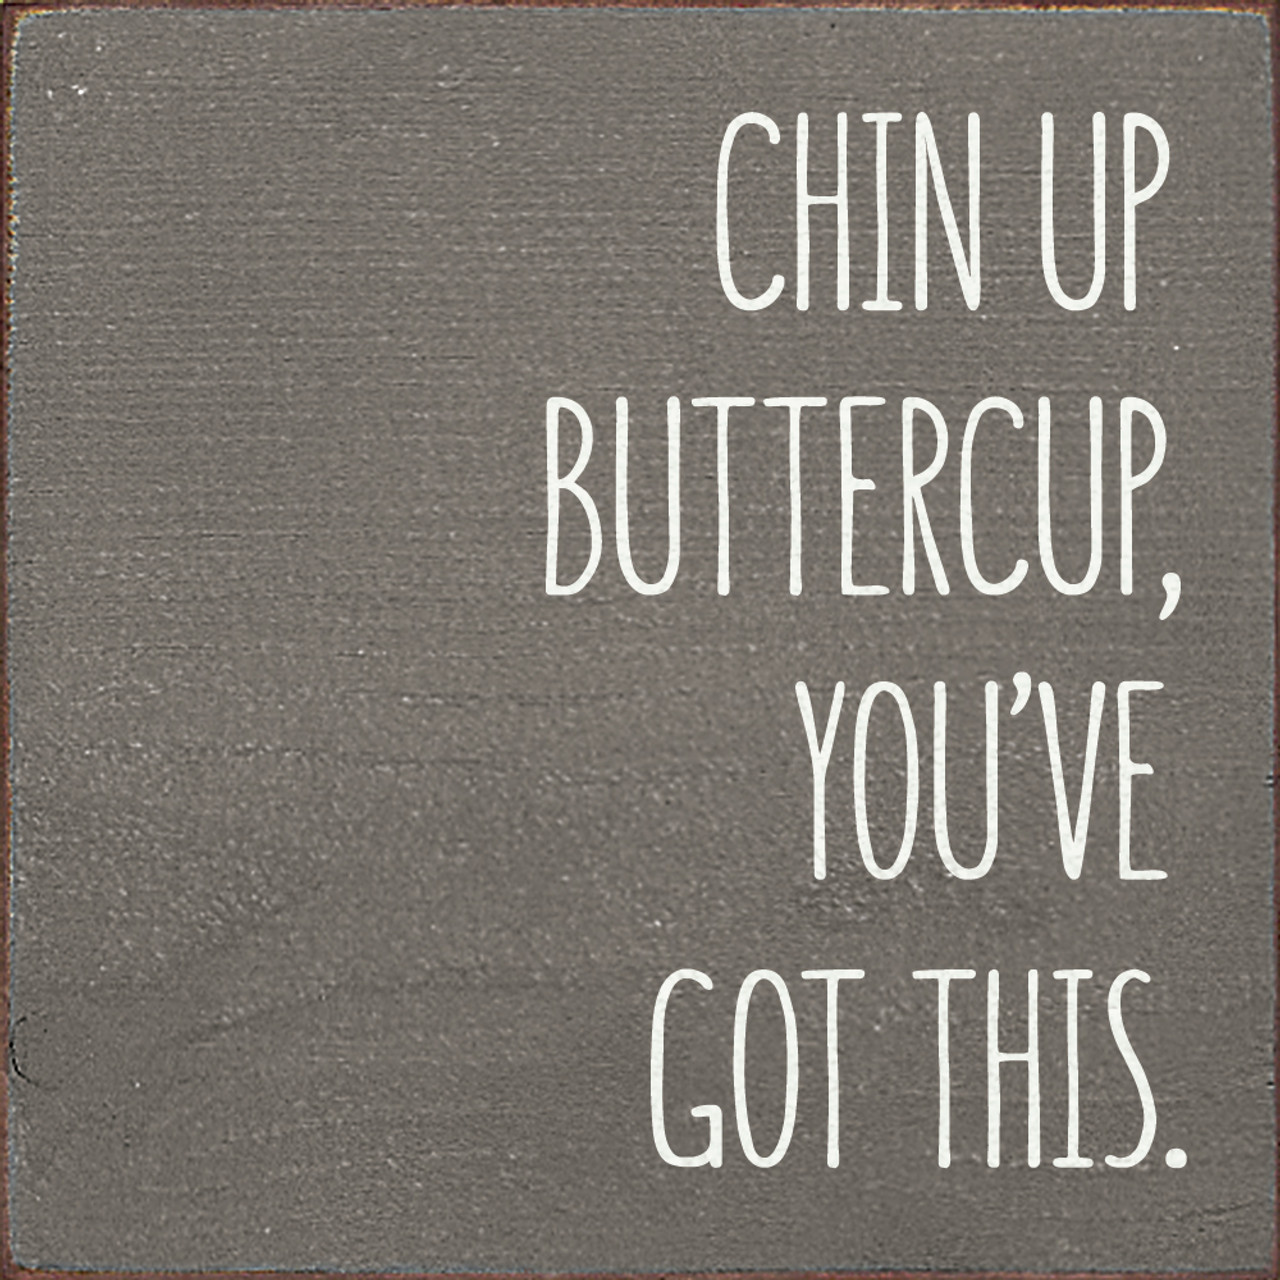 Chin Up Buttercup, You've Got This., Cute Encouraging Wood Sign